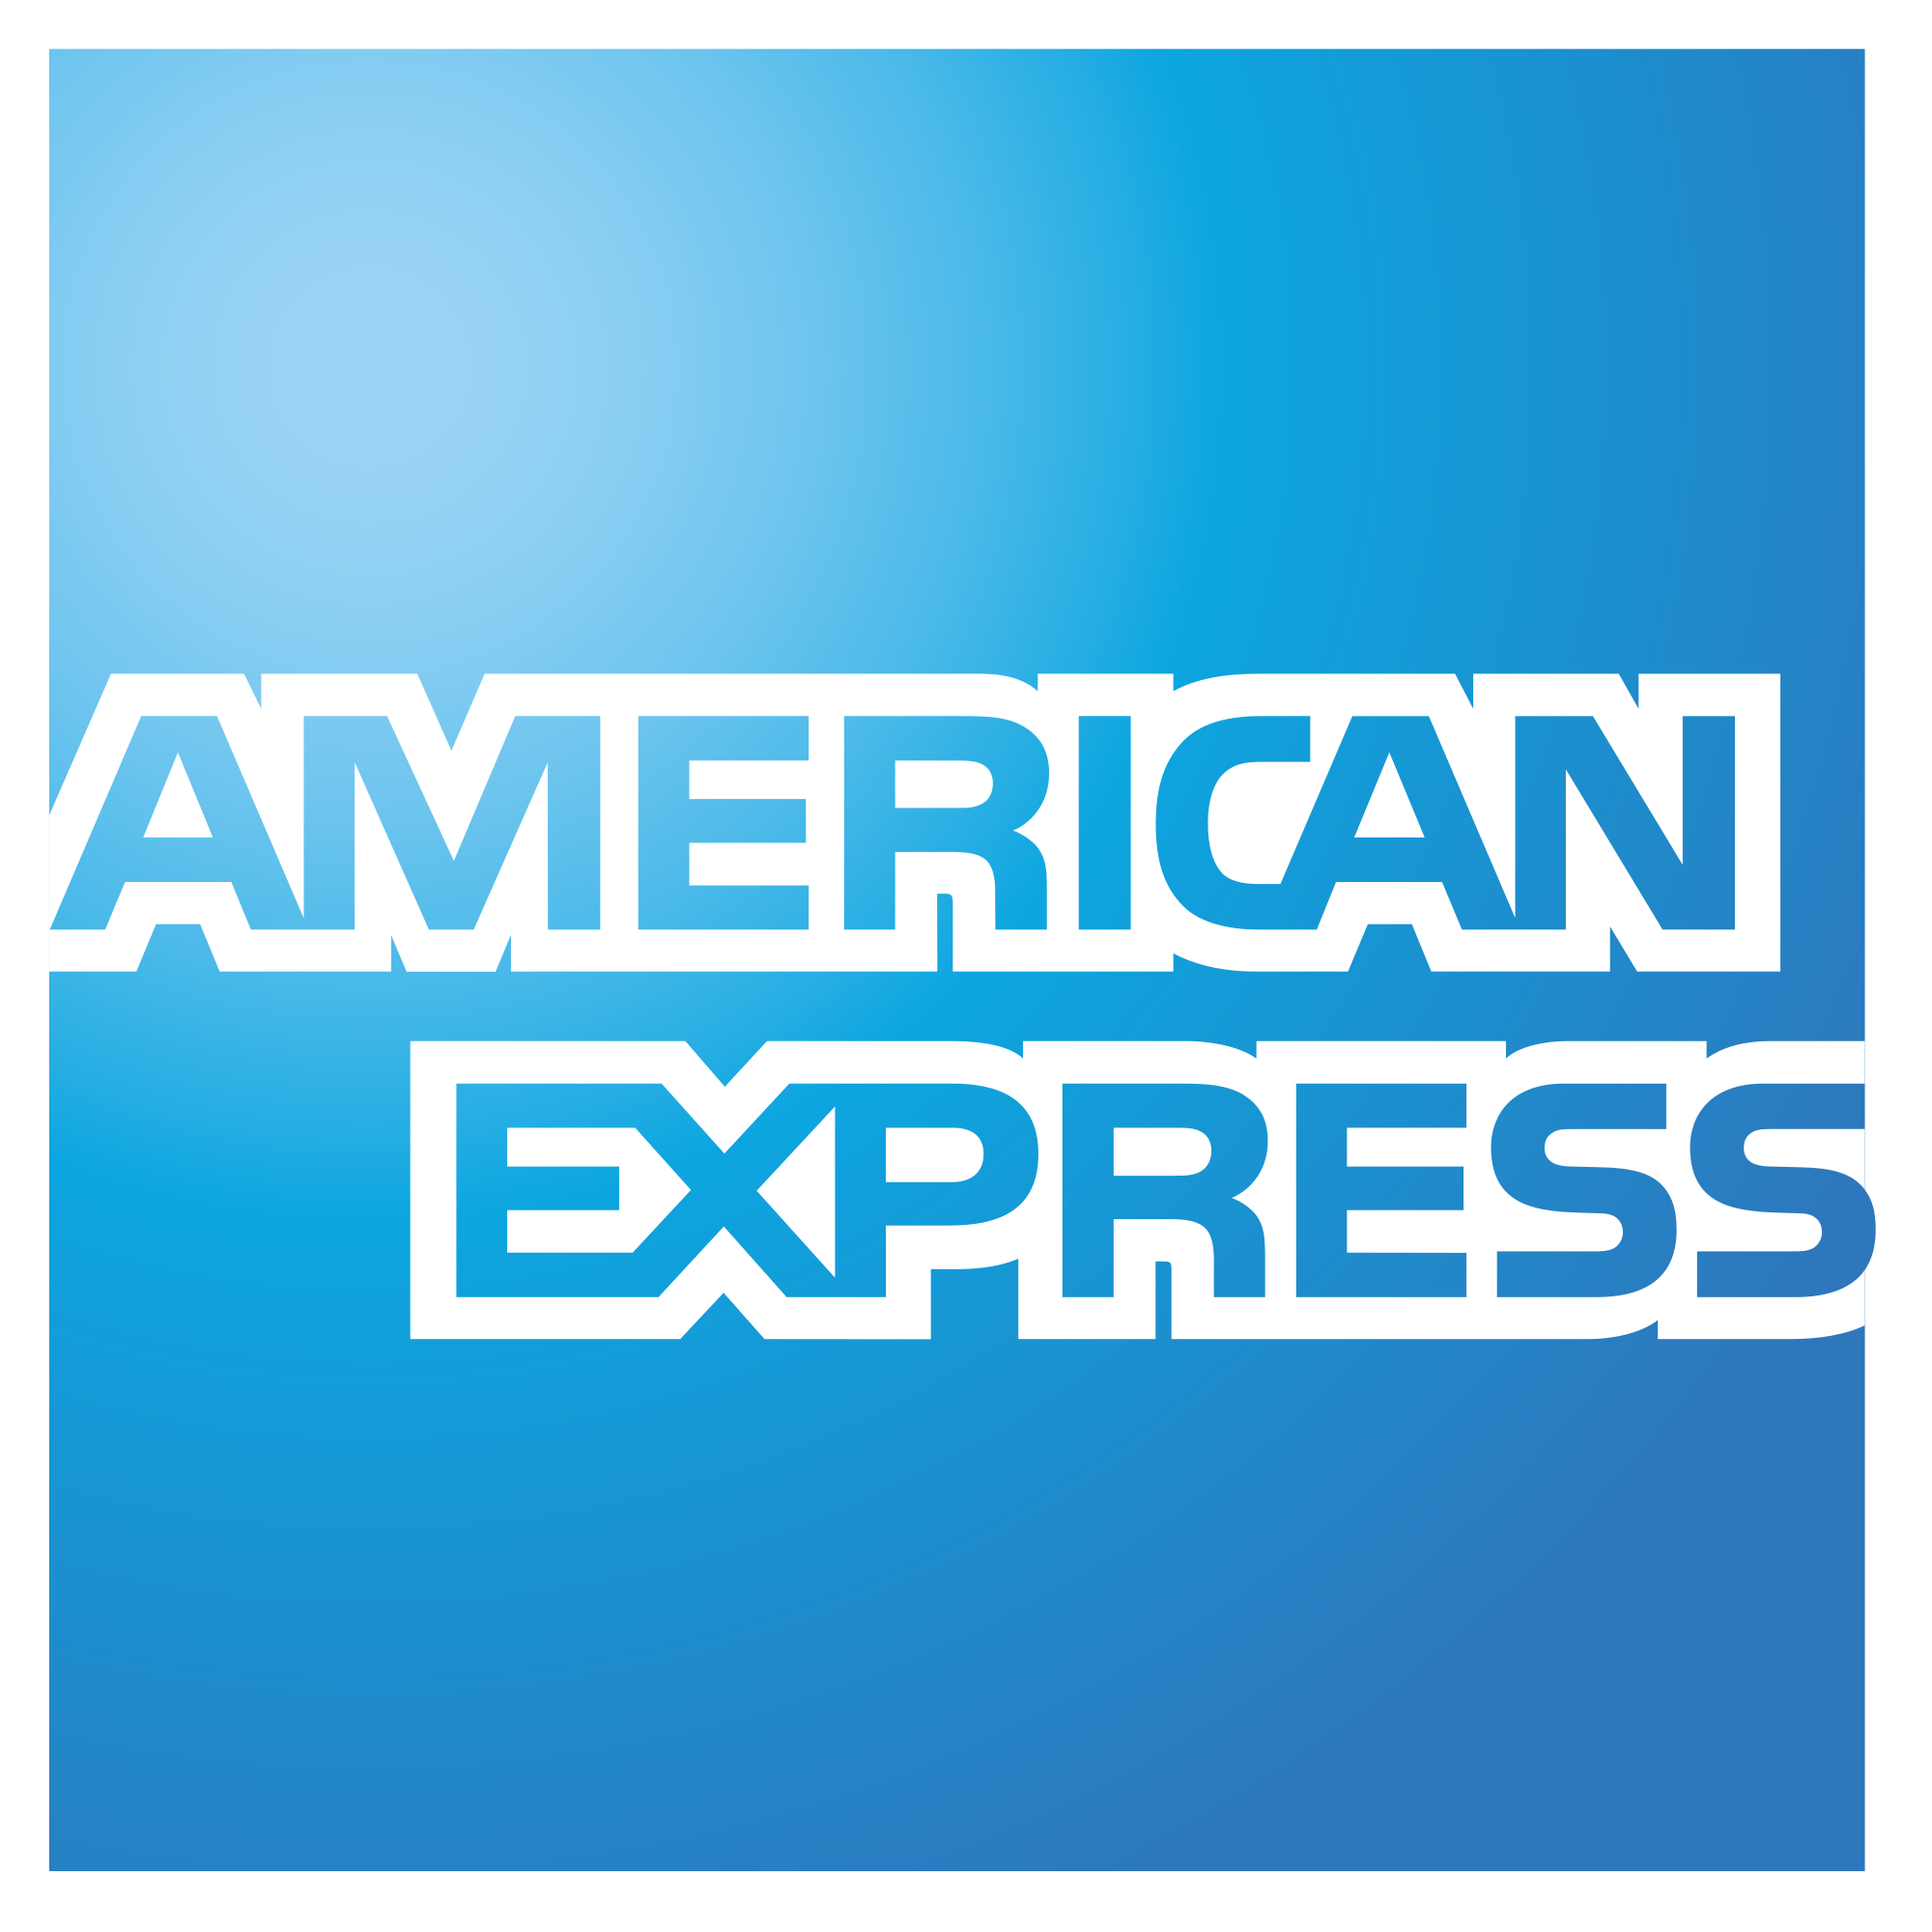 More about AMERICAN EXPRESS